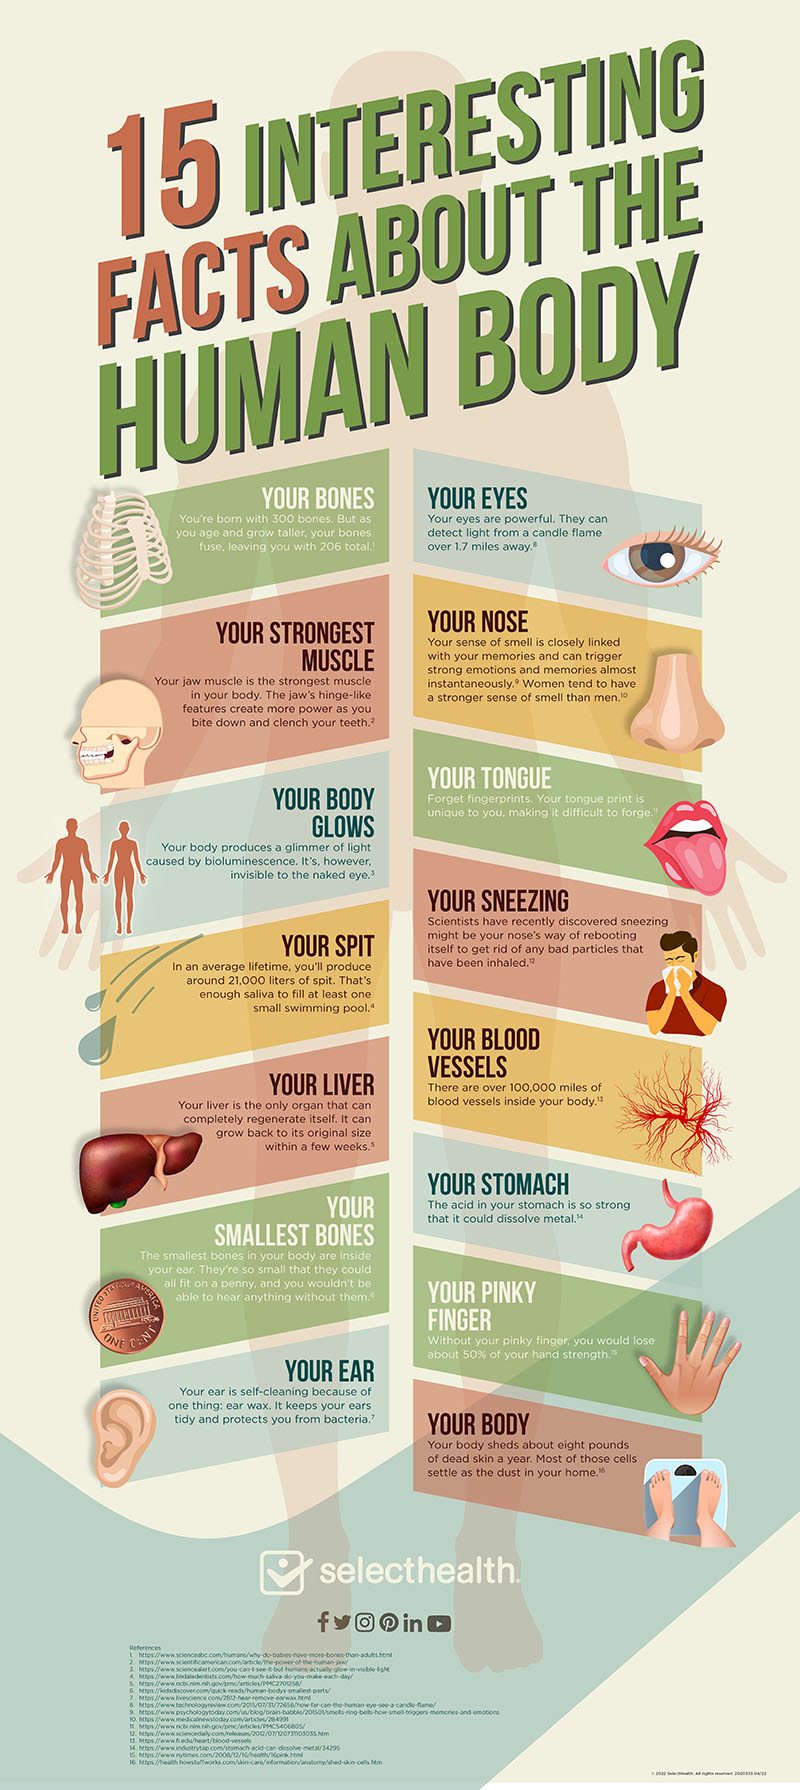 15 Interesting Facts About the Human Body Infographic